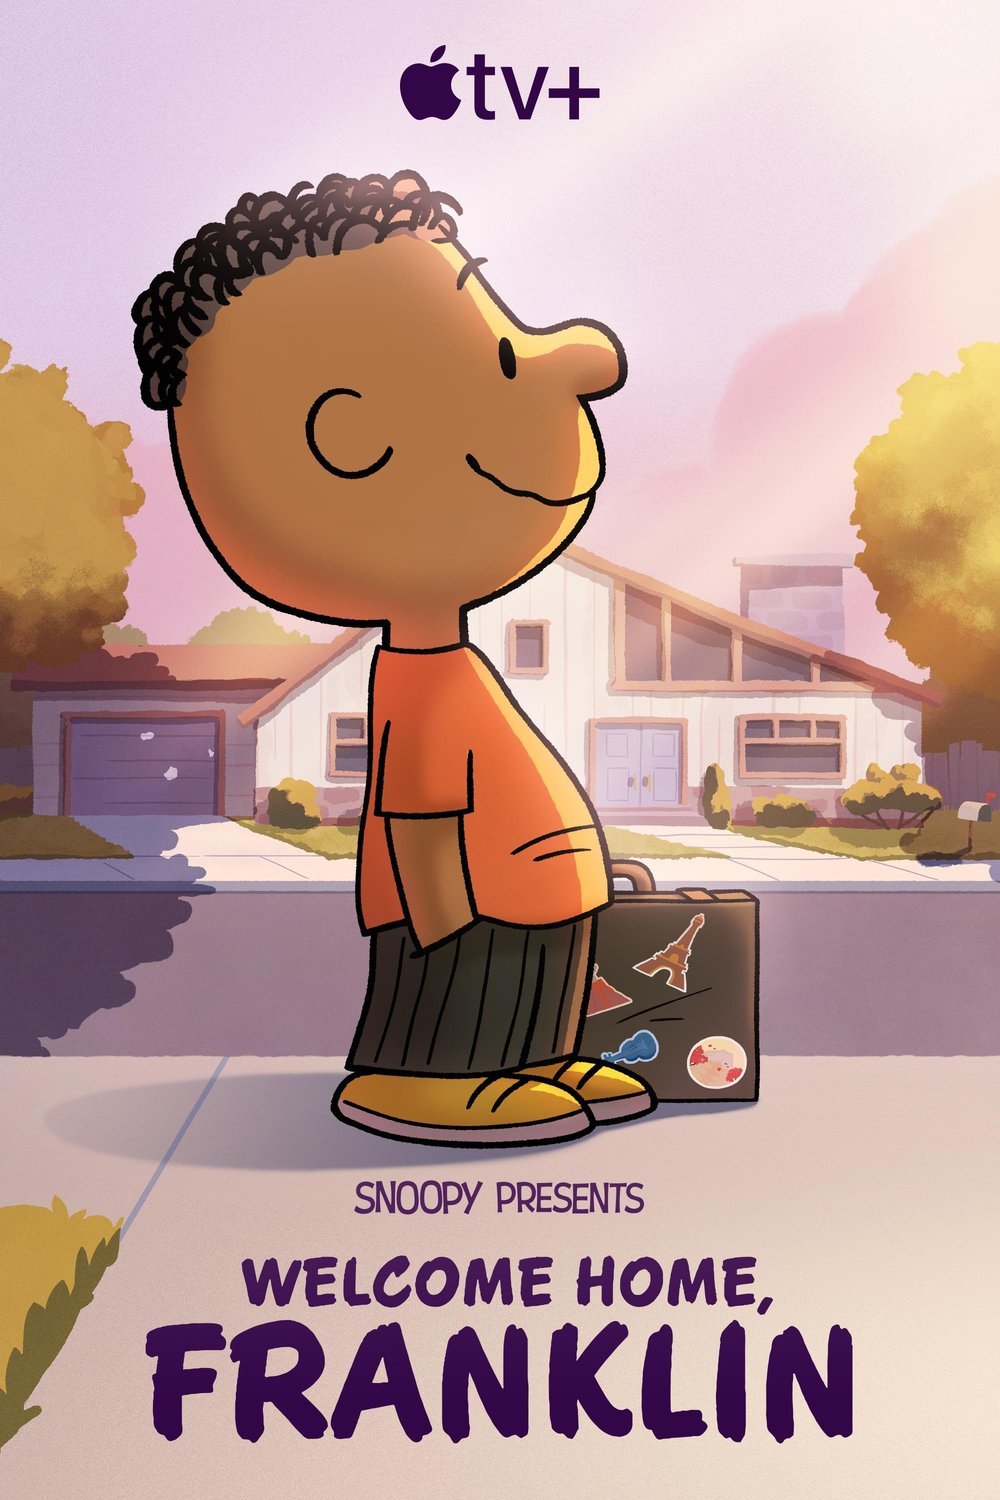 Poster of the movie Snoopy Presents: Welcome Home, Franklin